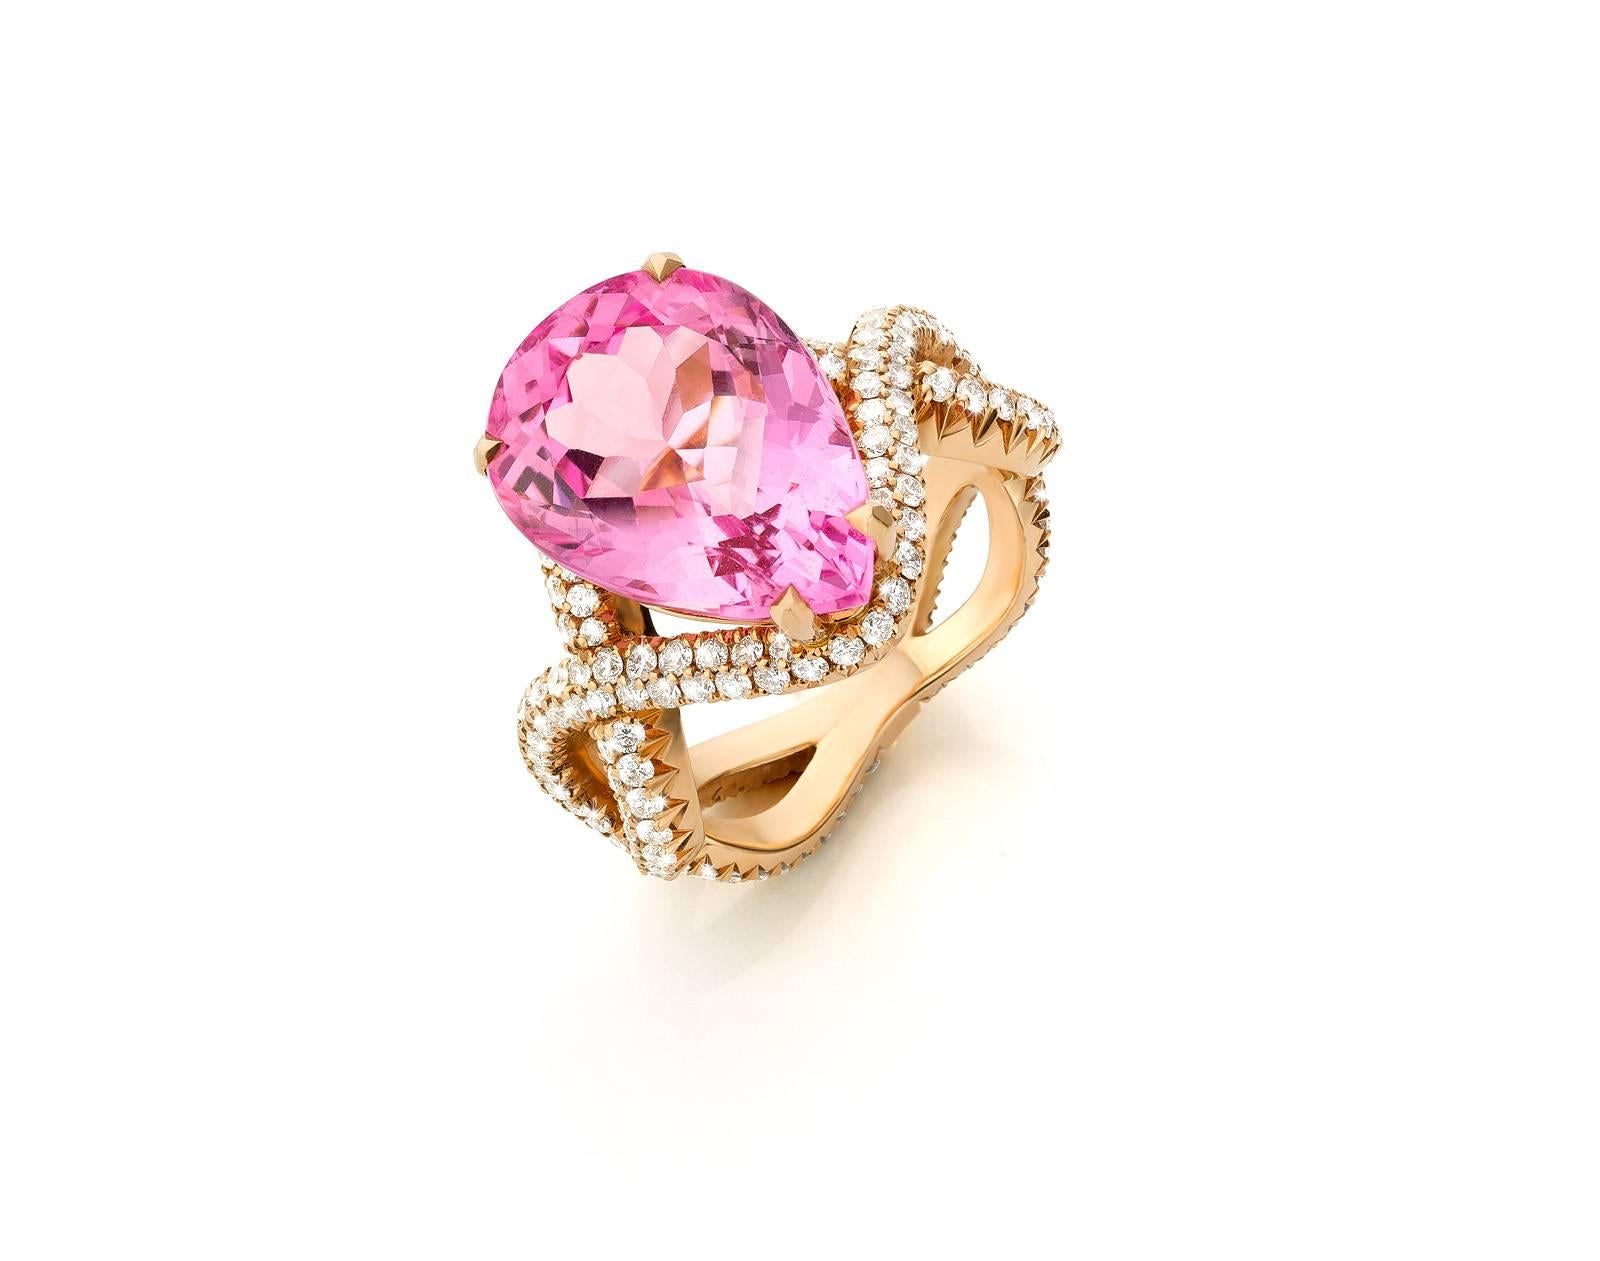 This rose gold eighteen carat ring is handset with a Madagascar vivid pink morganite. Morganite's in this color are very rare. 
The ring is set with diamonds of VVS1 quality and DEF color, all collection grade diamonds. 